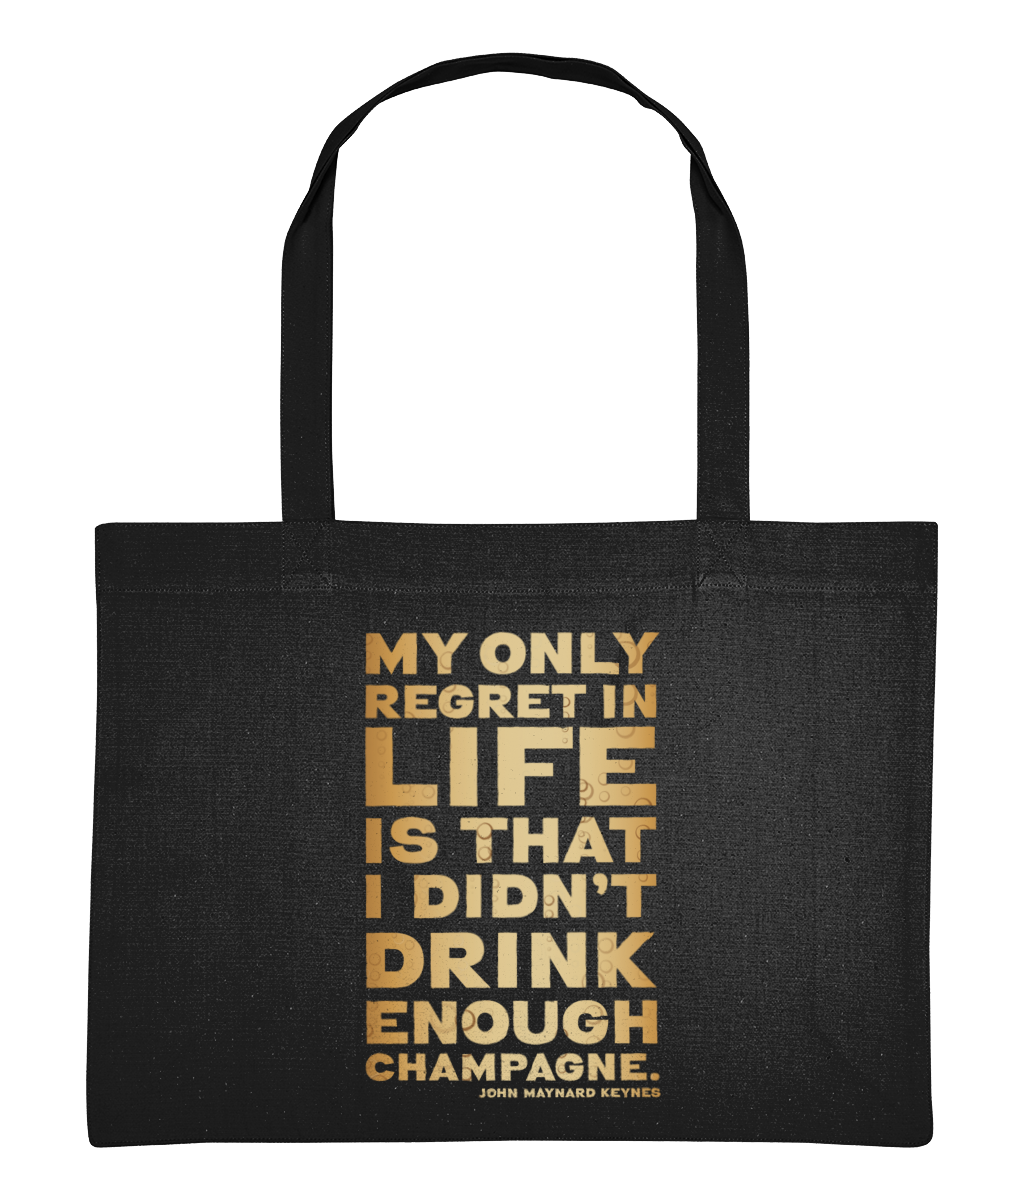 Champagne Shopping Bag featuring the quote "My only regret in life is that I didn't drink enough Champagne"